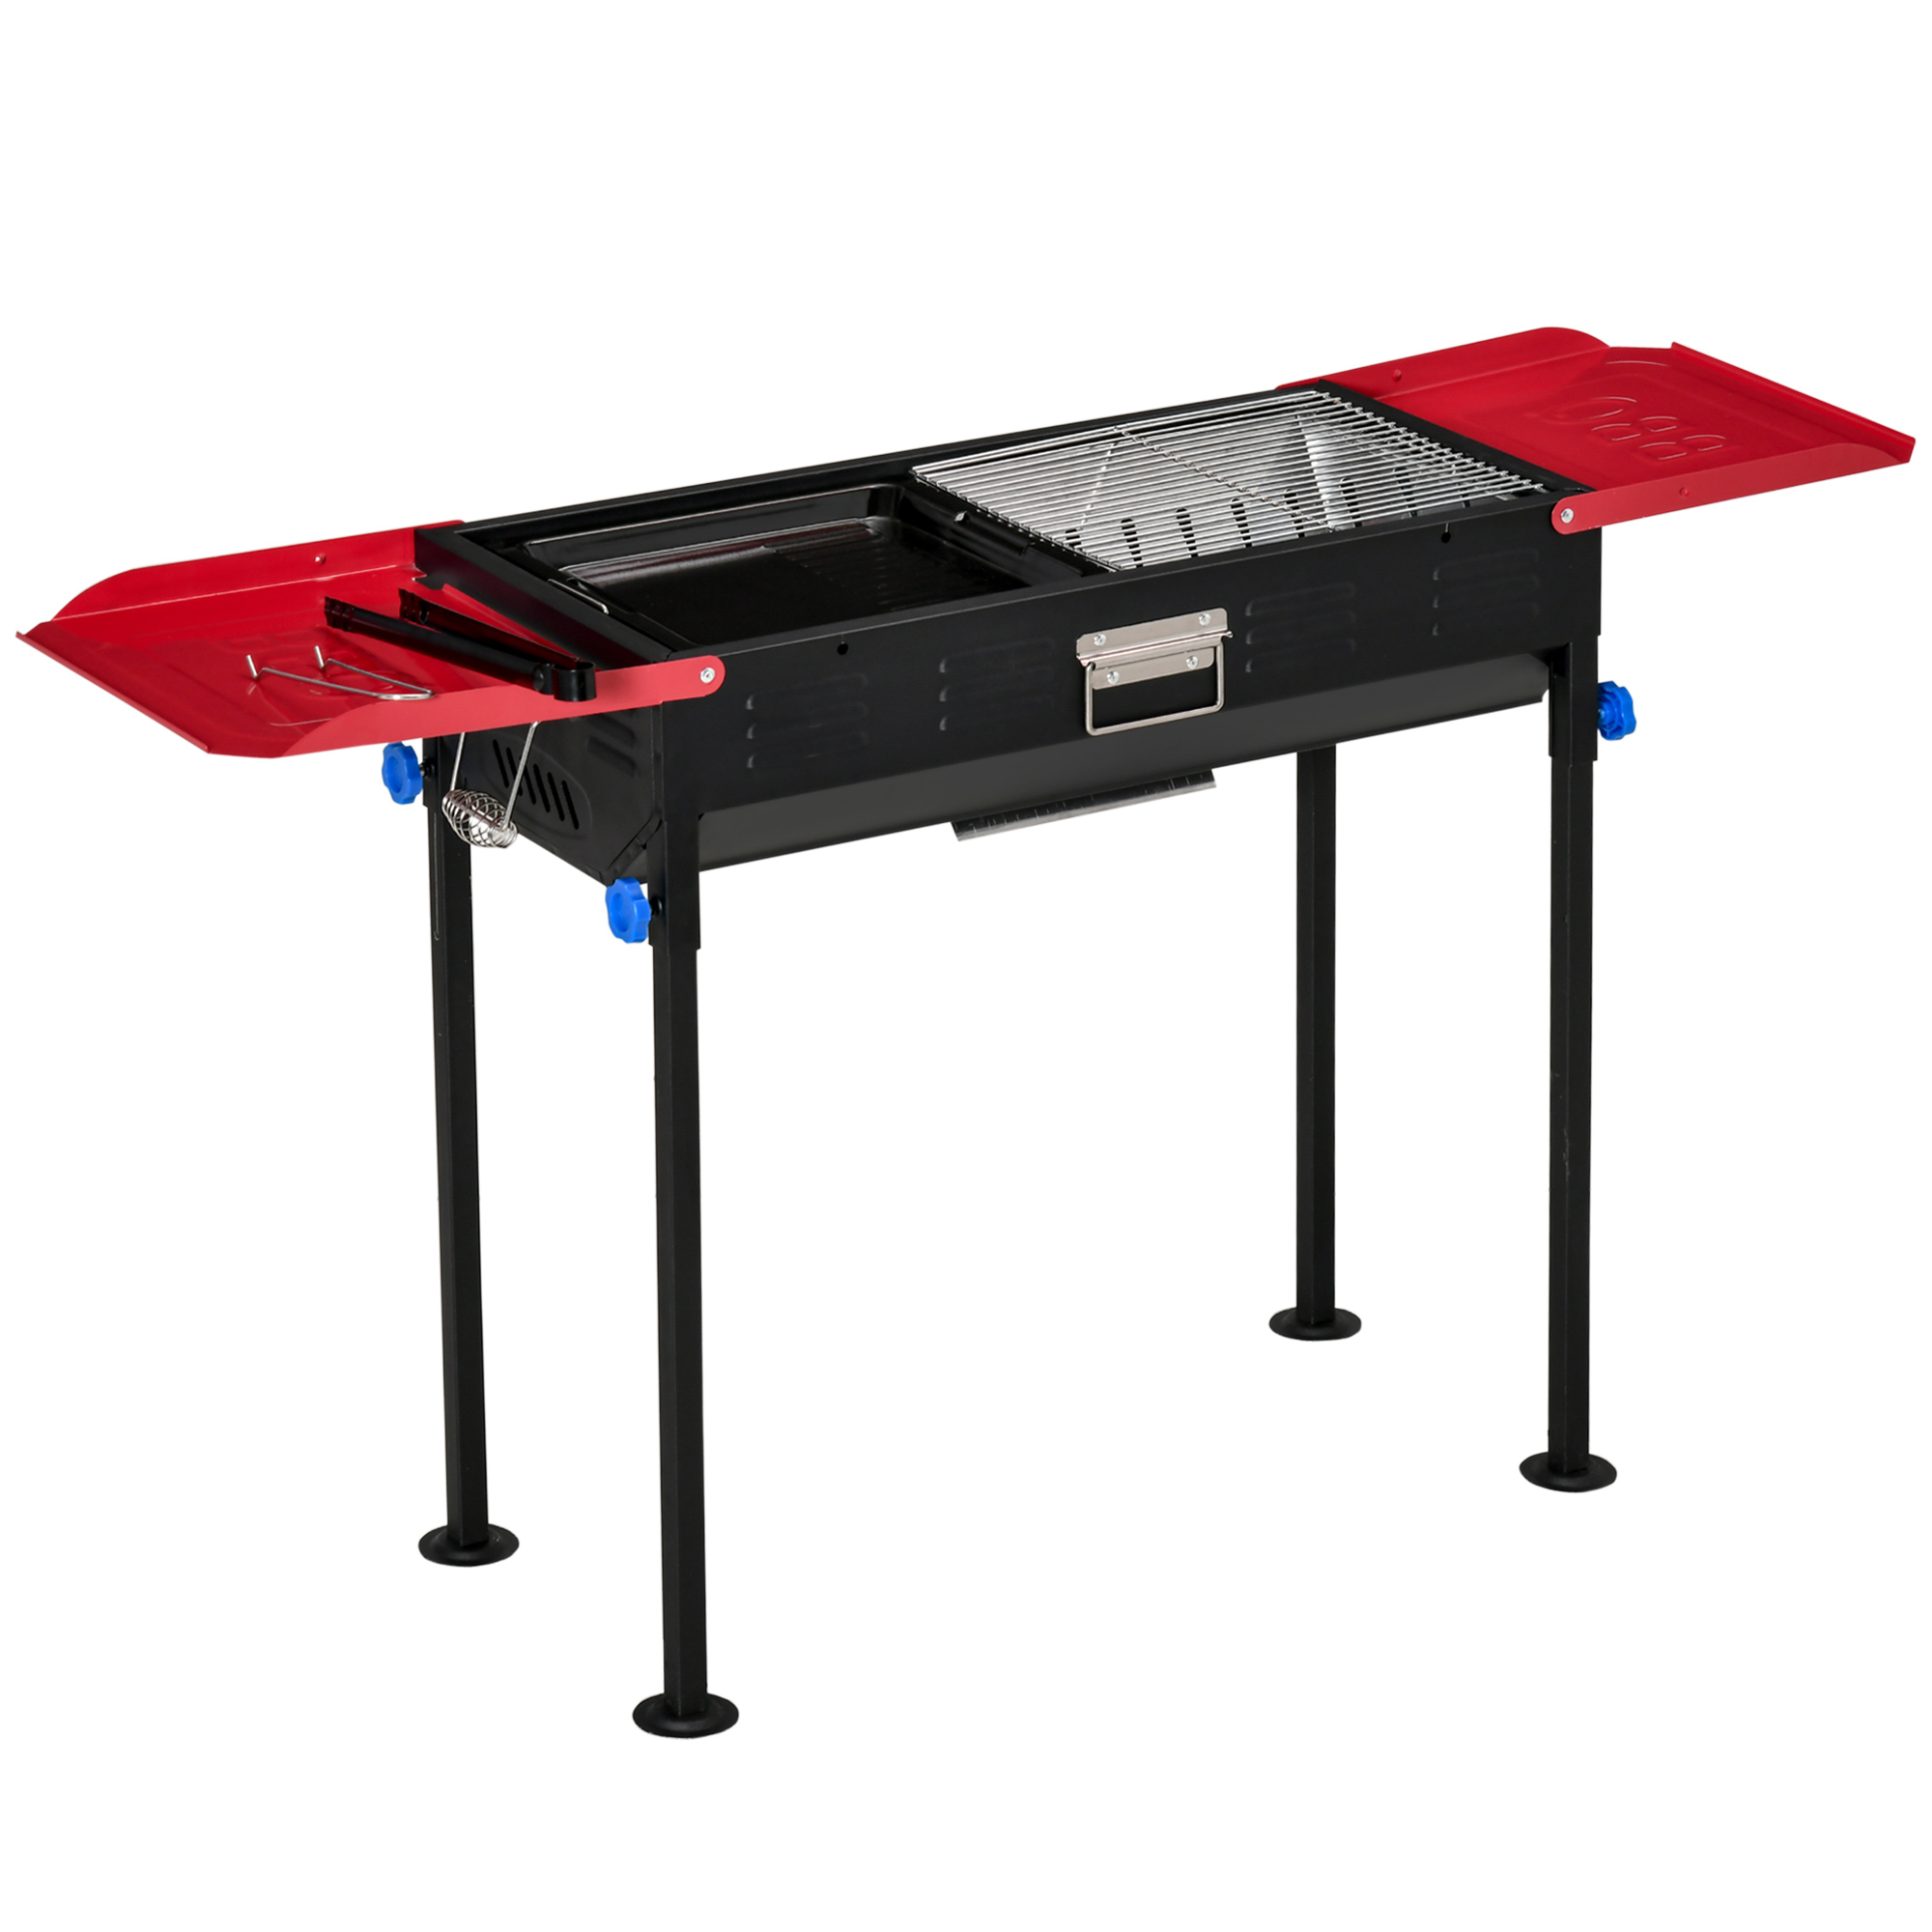 Outsunny Portable Charcoal Bbq Grill Height Adjustable Barbecue W/ Side Shelves, Grill Net & Pan Easy Set-up